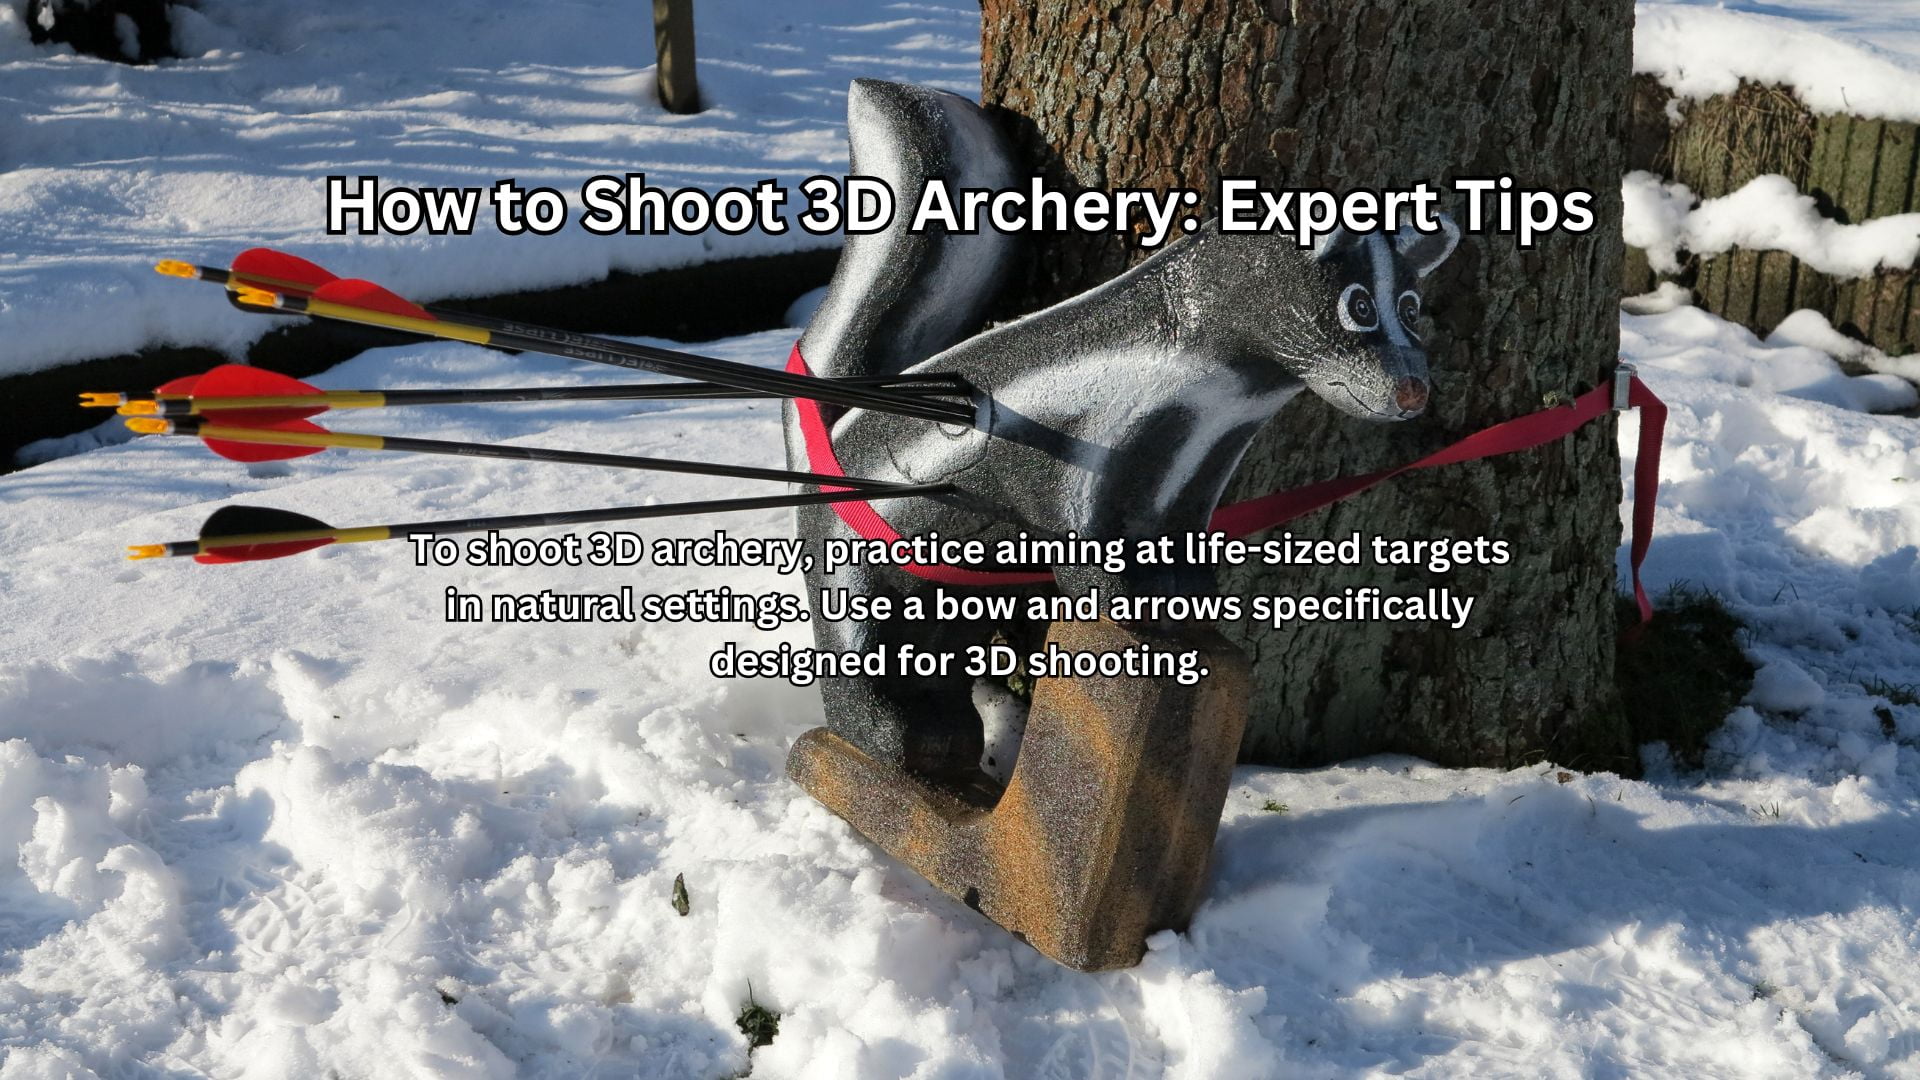 How to Shoot 3D Archery